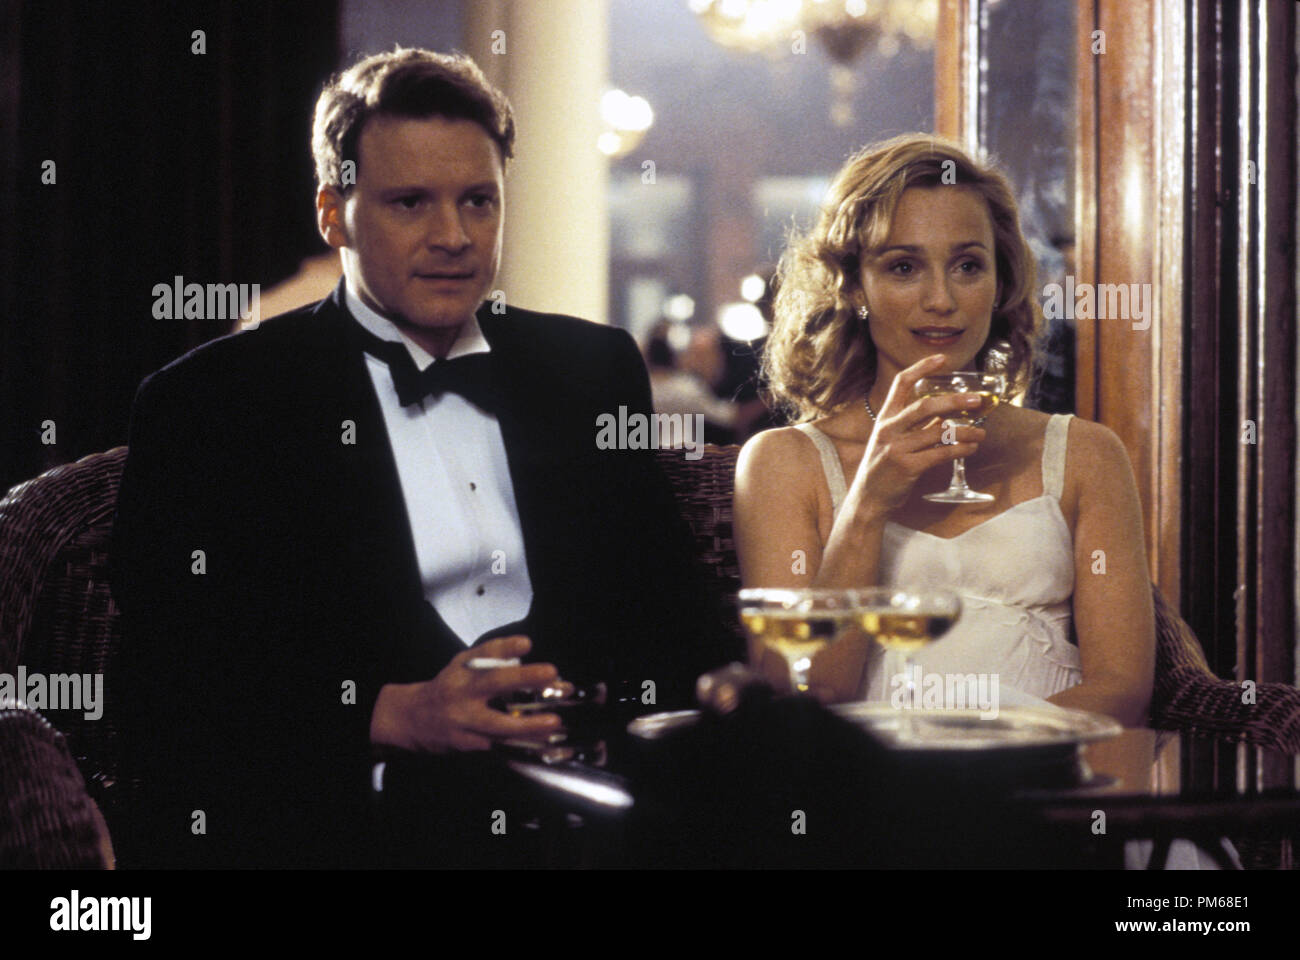 Film Still from 'The English Patient' Colin Firth, Kristin Scott Thomas © 1996 Miramax Photo Credit: Phil Bray  File Reference # 31042156THA  For Editorial Use Only - All Rights Reserved Stock Photo